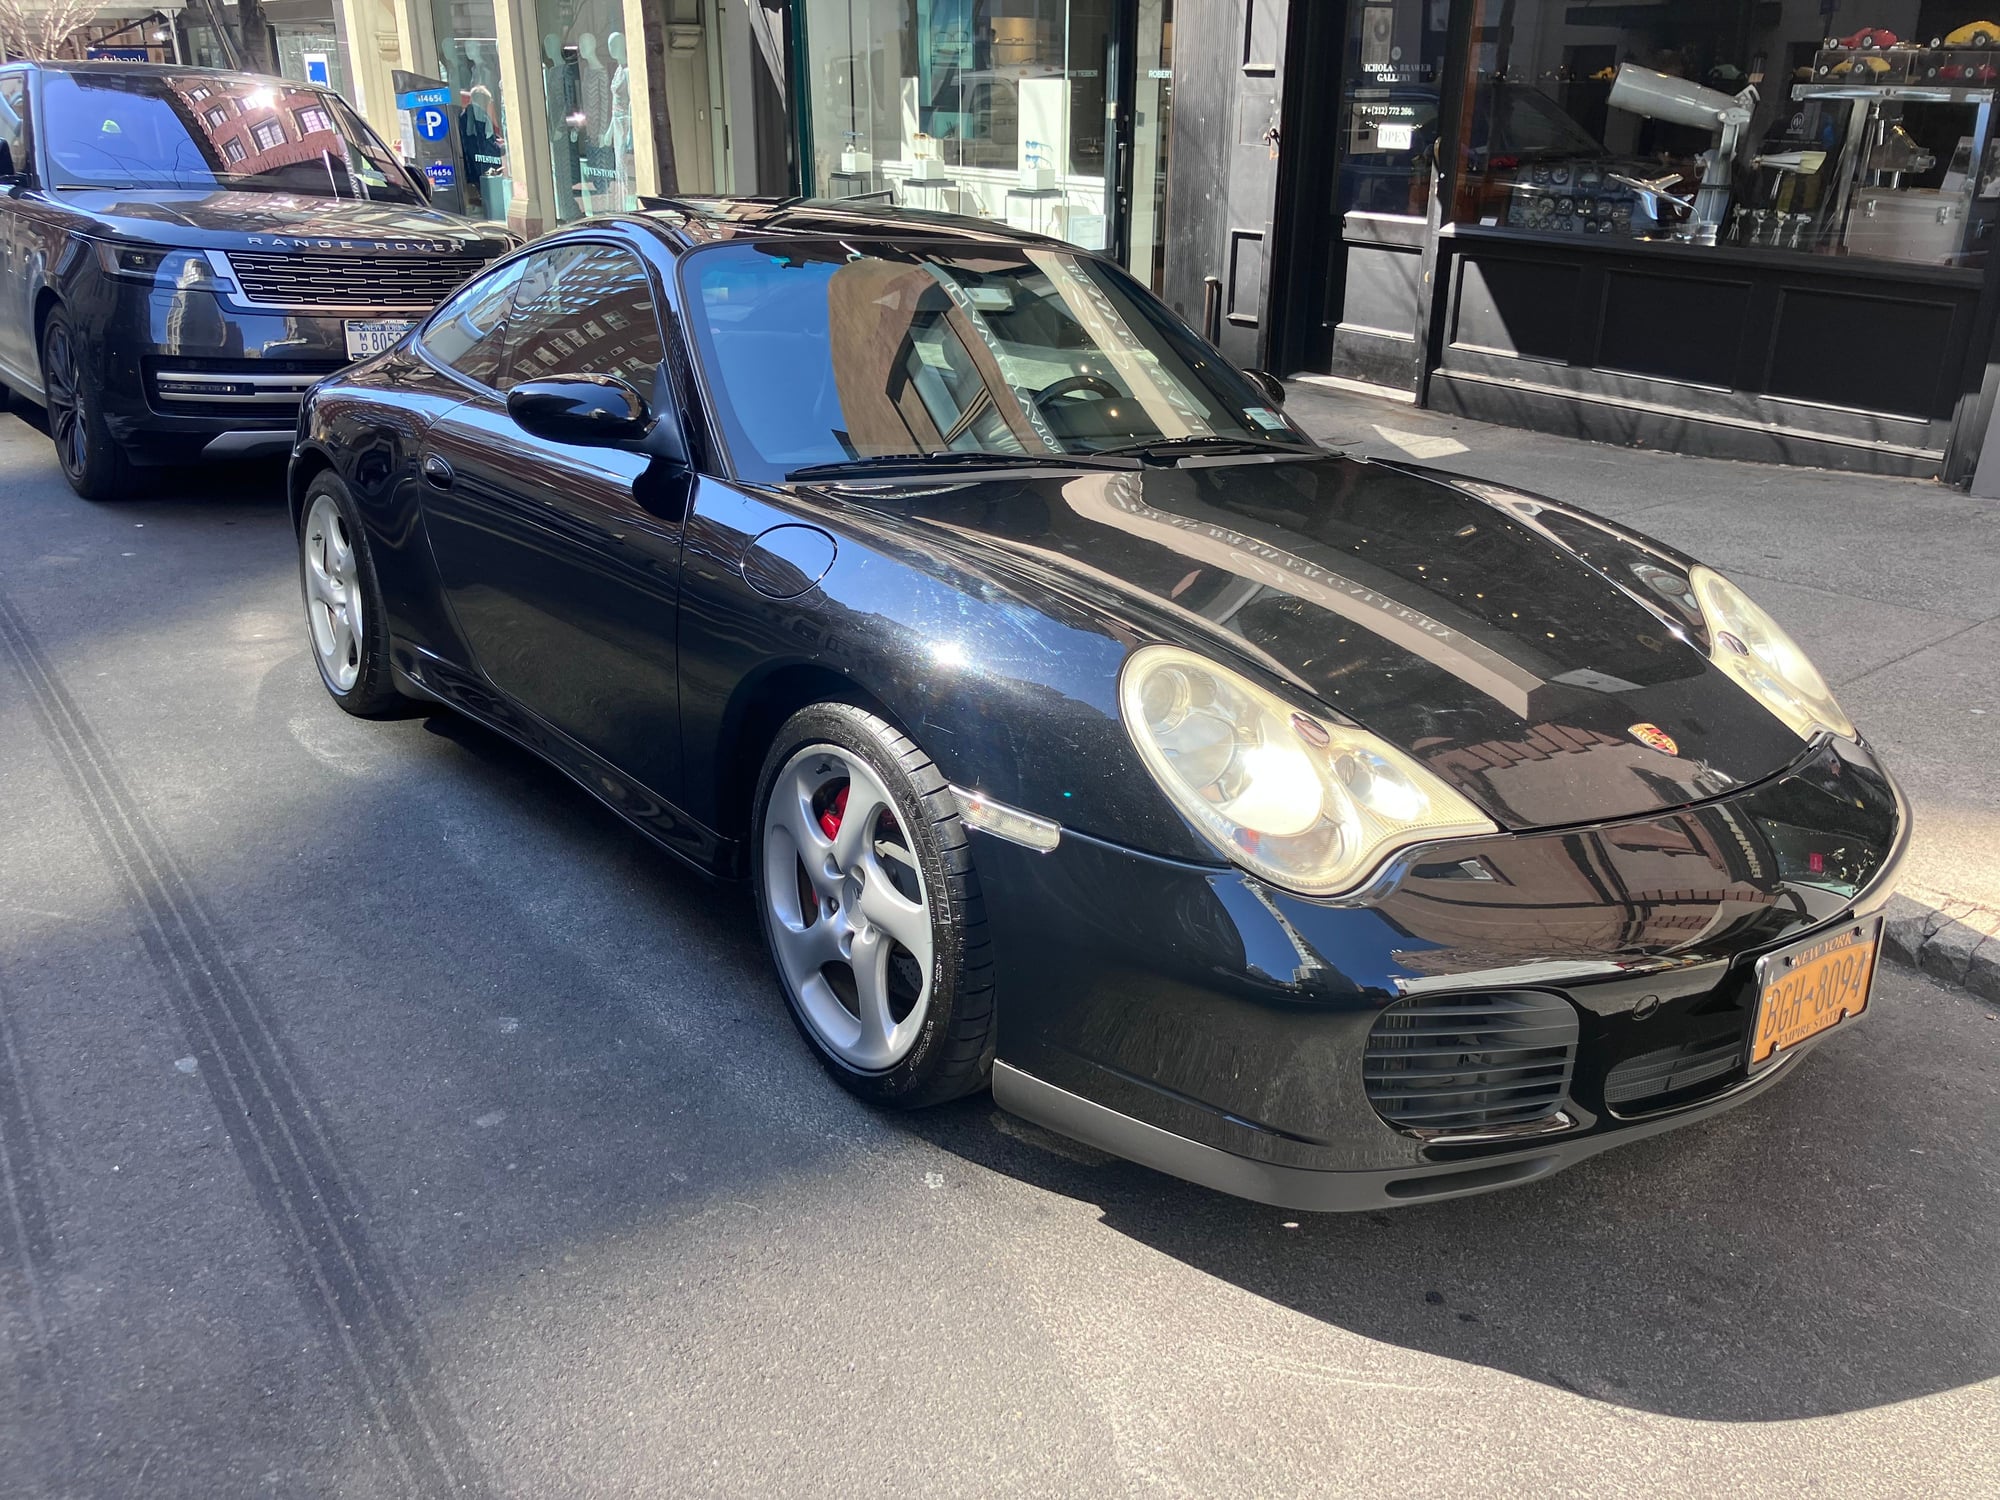 2002 Porsche 911 -  - Used - VIN WPOAA299825623436 - 199,600 Miles - Manual - Coupe - Black - New York City, NY 10024, United States